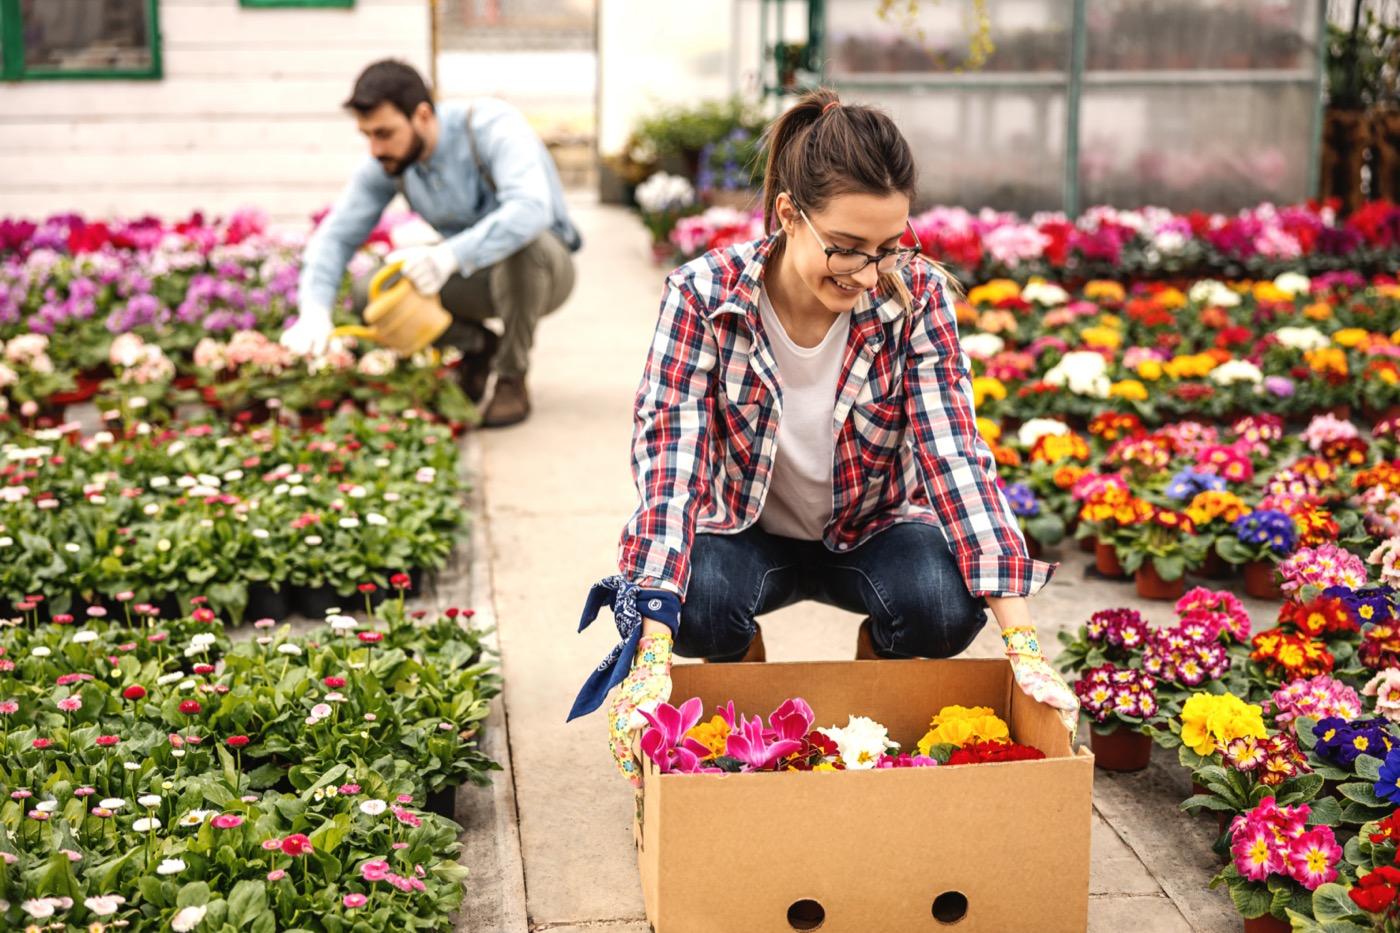 The staff can complete over 100,000 flower orders annually thanks to a centralized management system.